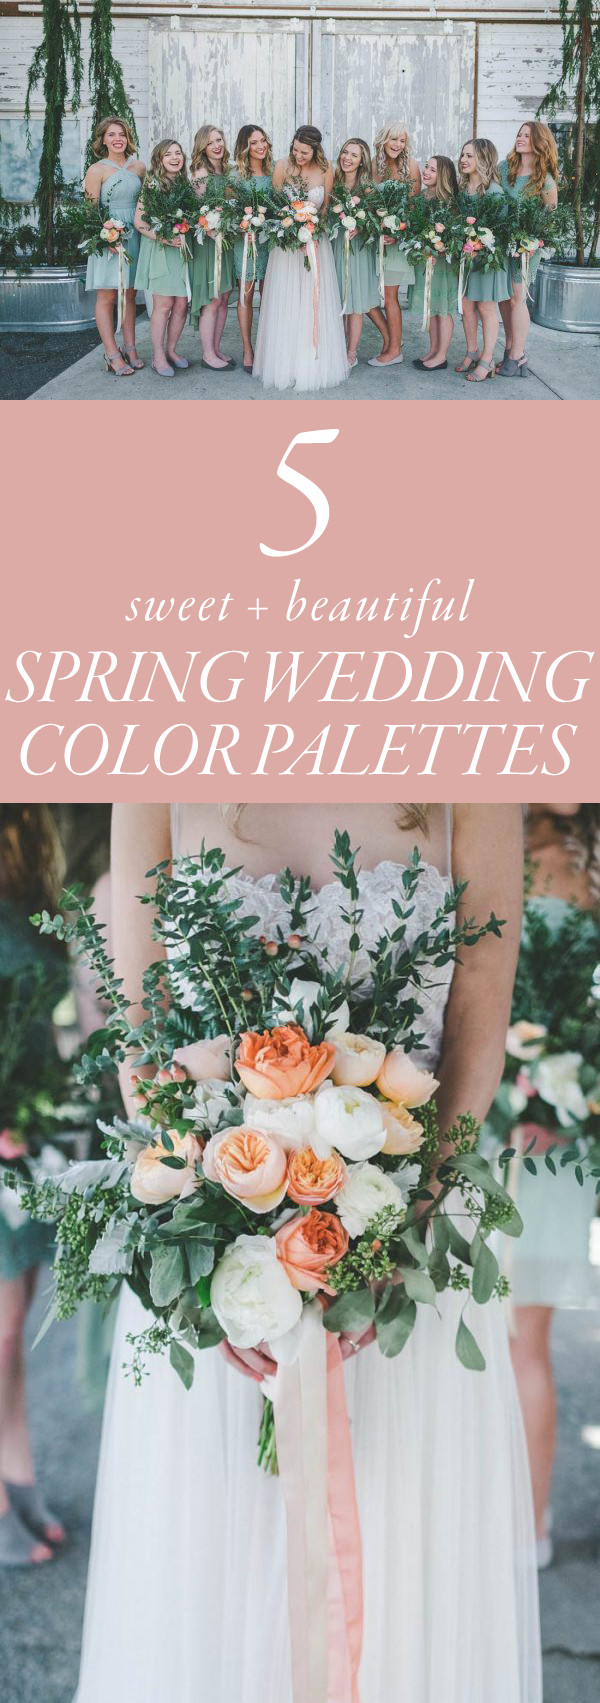 Wedding Colors For Spring
 5 Sweet Spring Wedding Color Palette Ideas